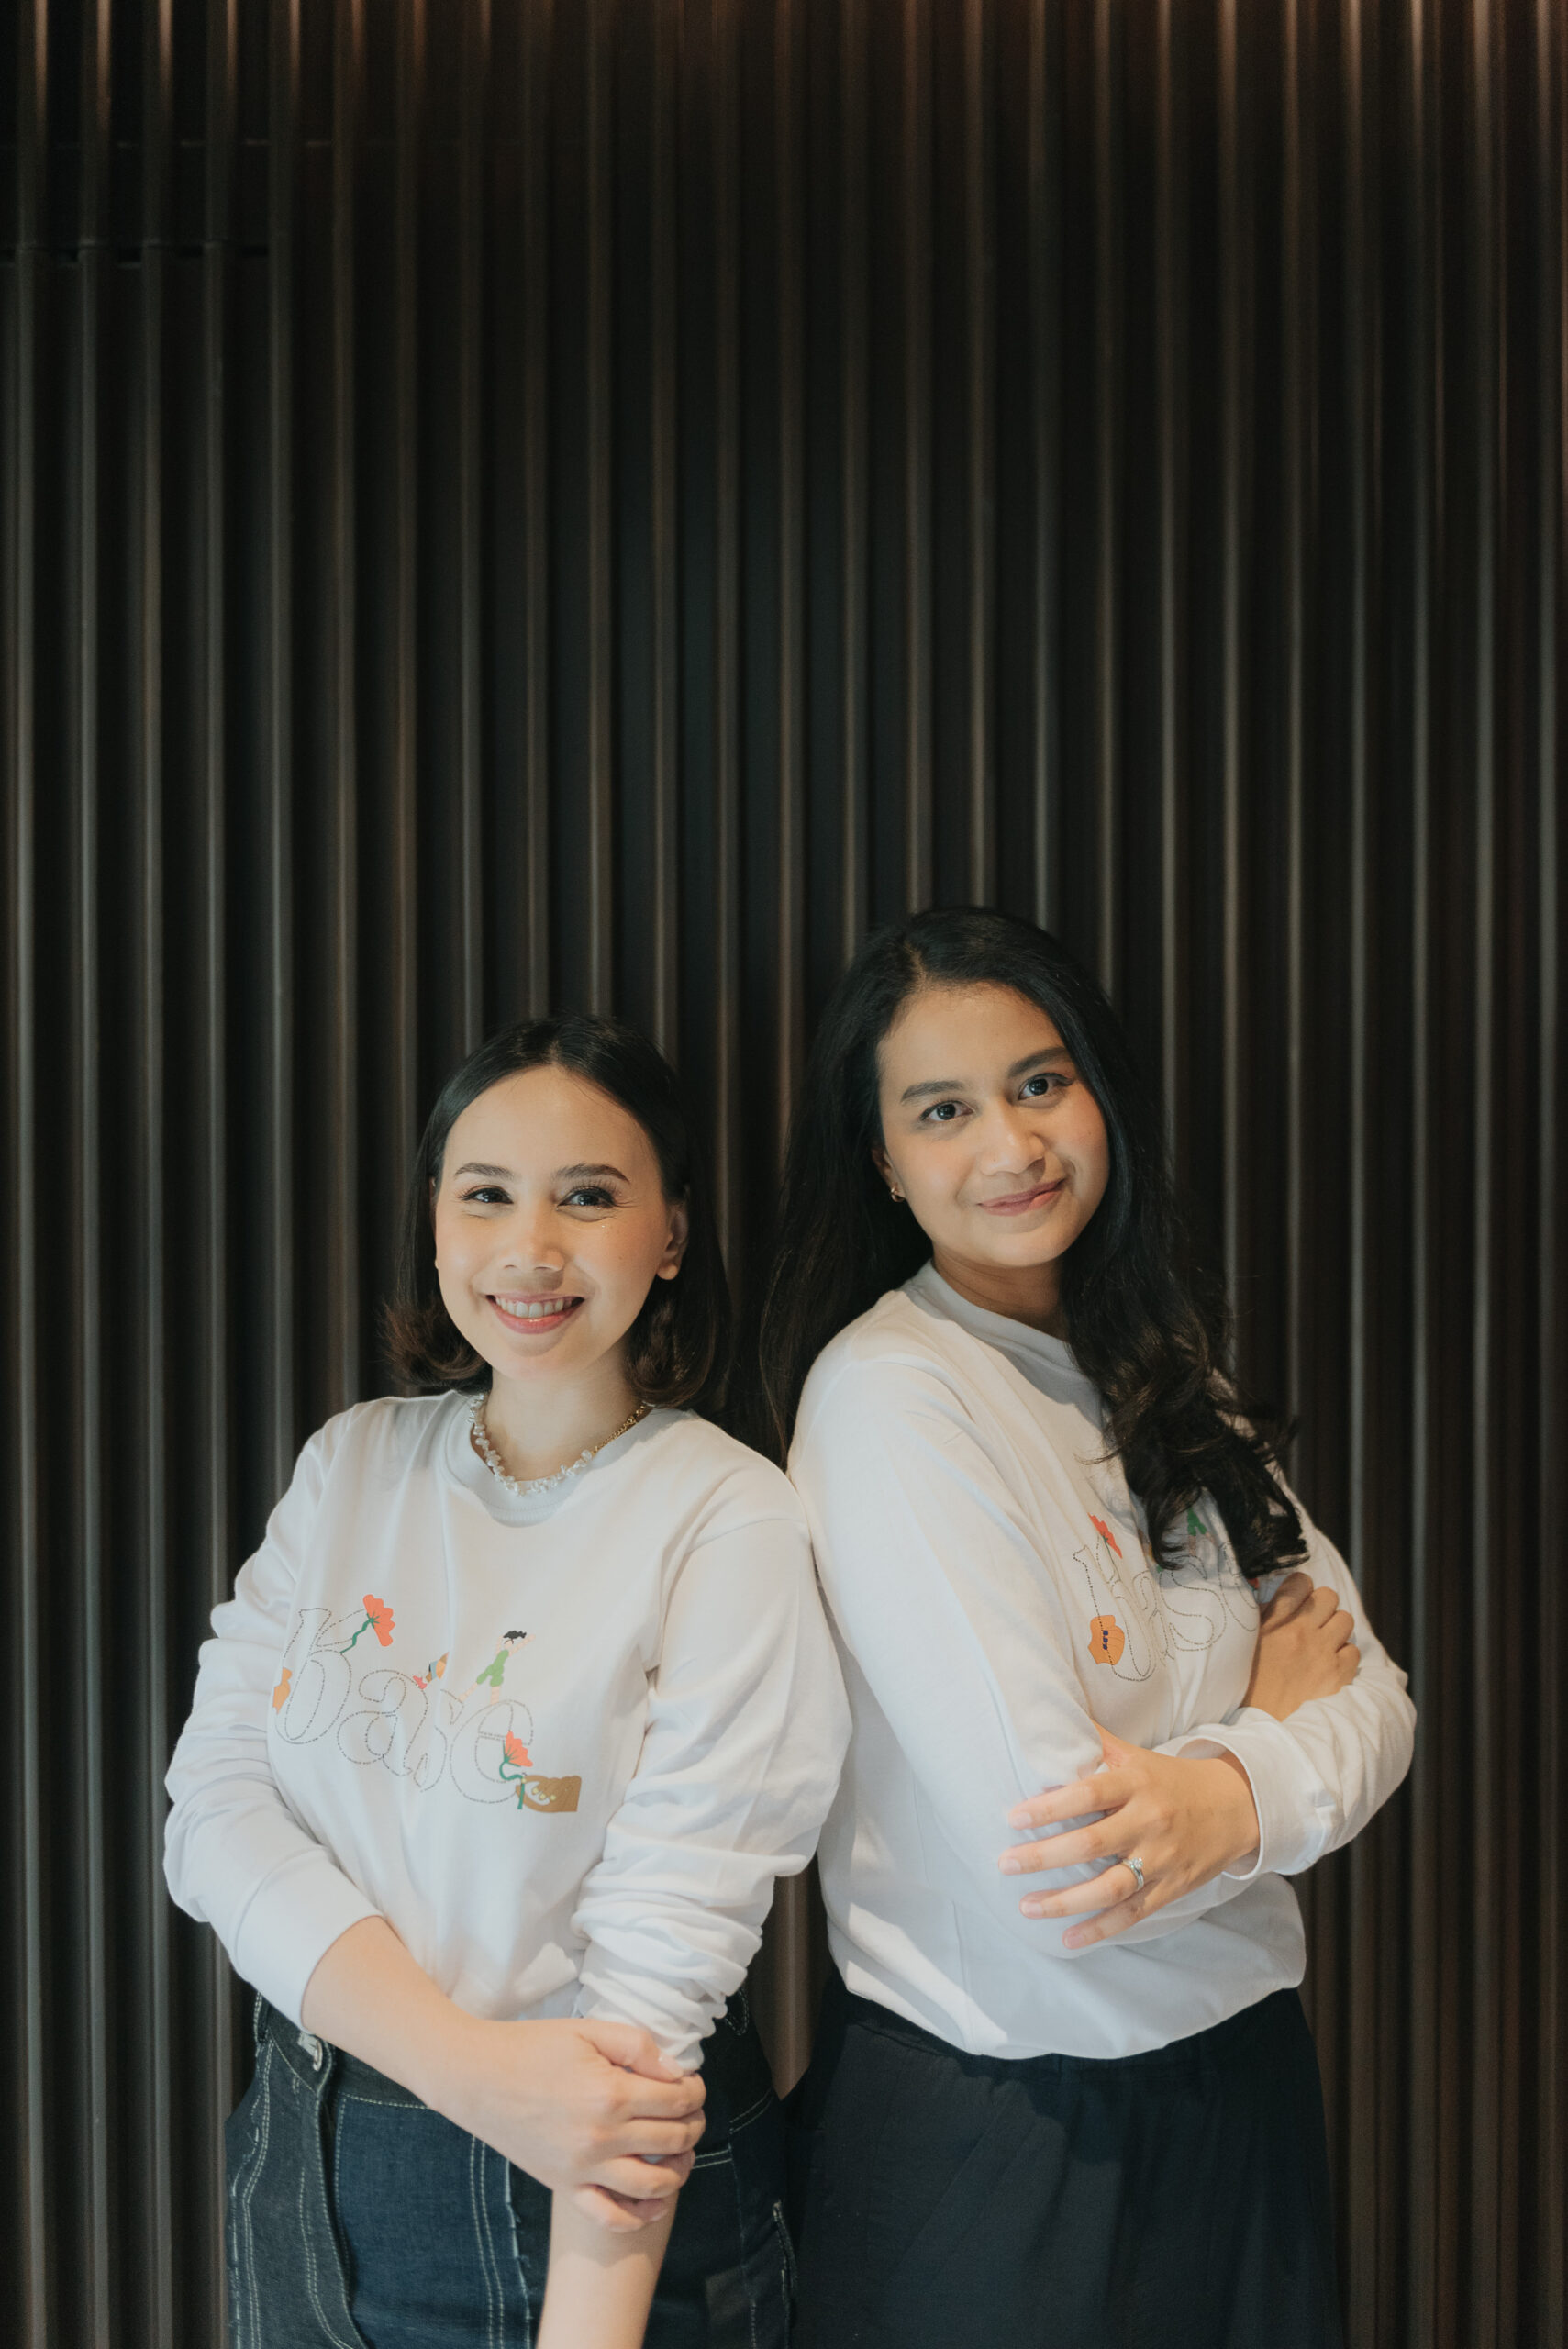 Indonesian DTC beauty and wellness Base lands $6M Series A round led by Rakuten Ventures